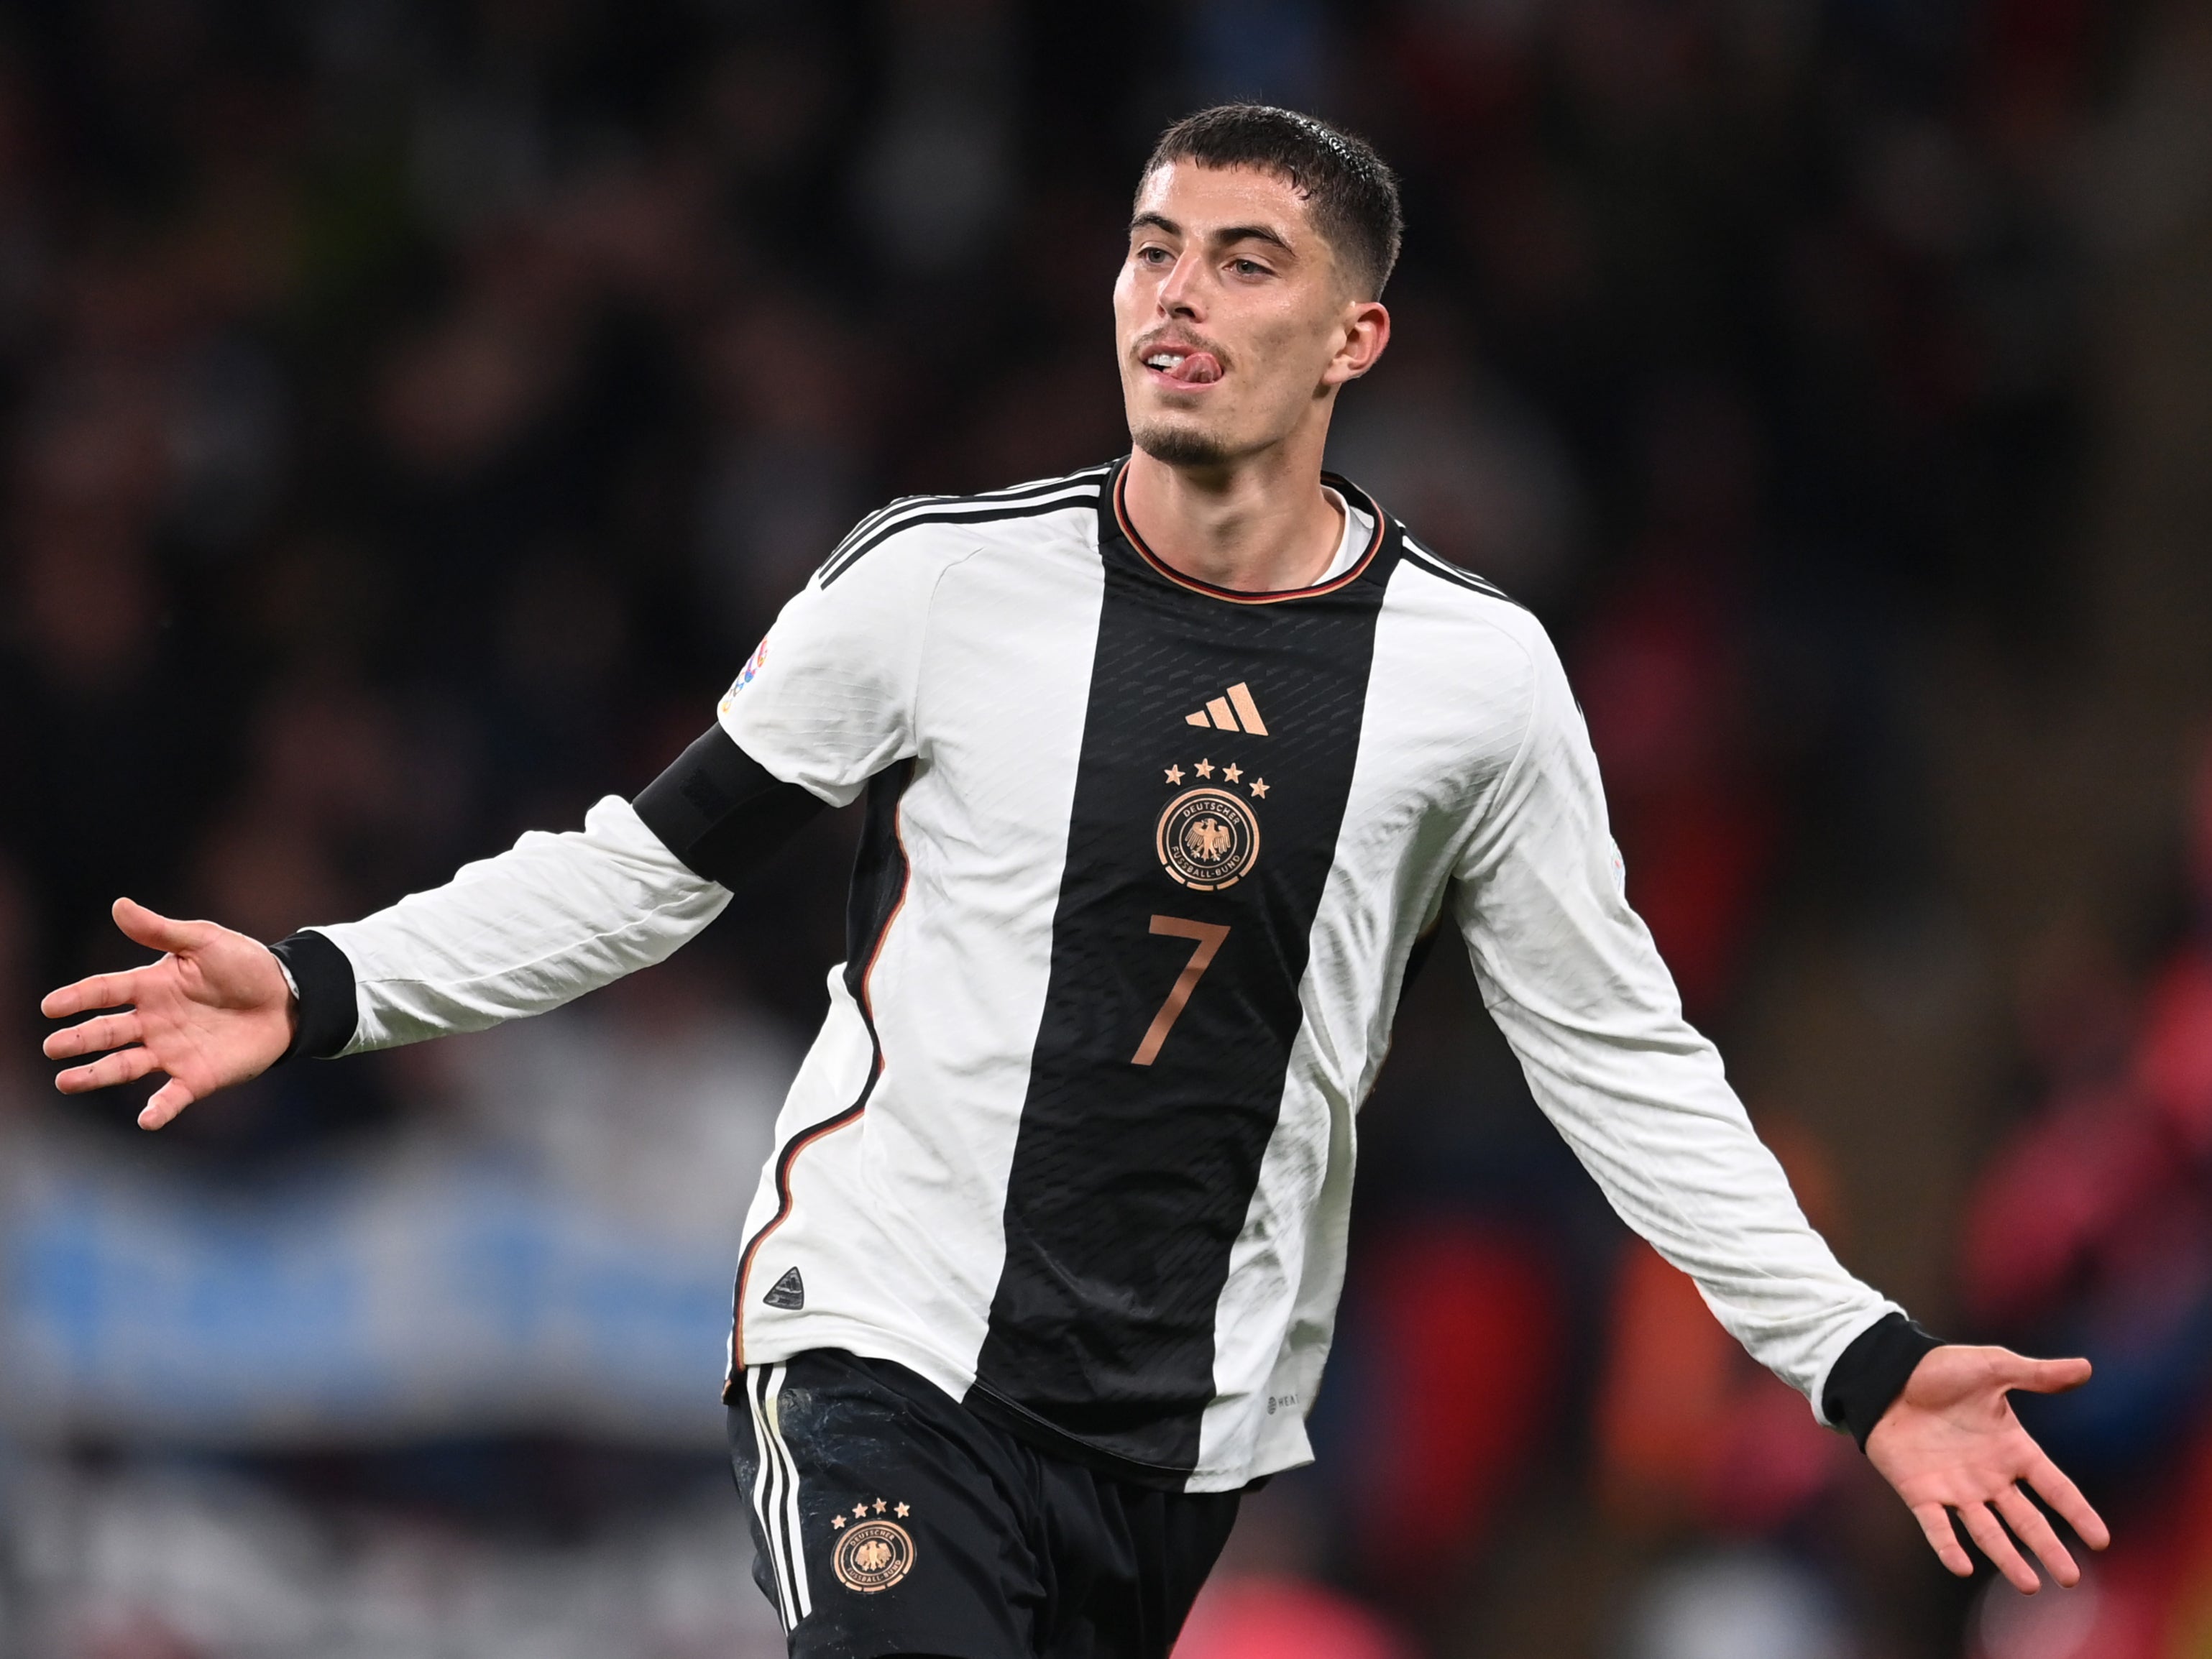 Kai Havertz netted twice against England in the Nations League this autumn